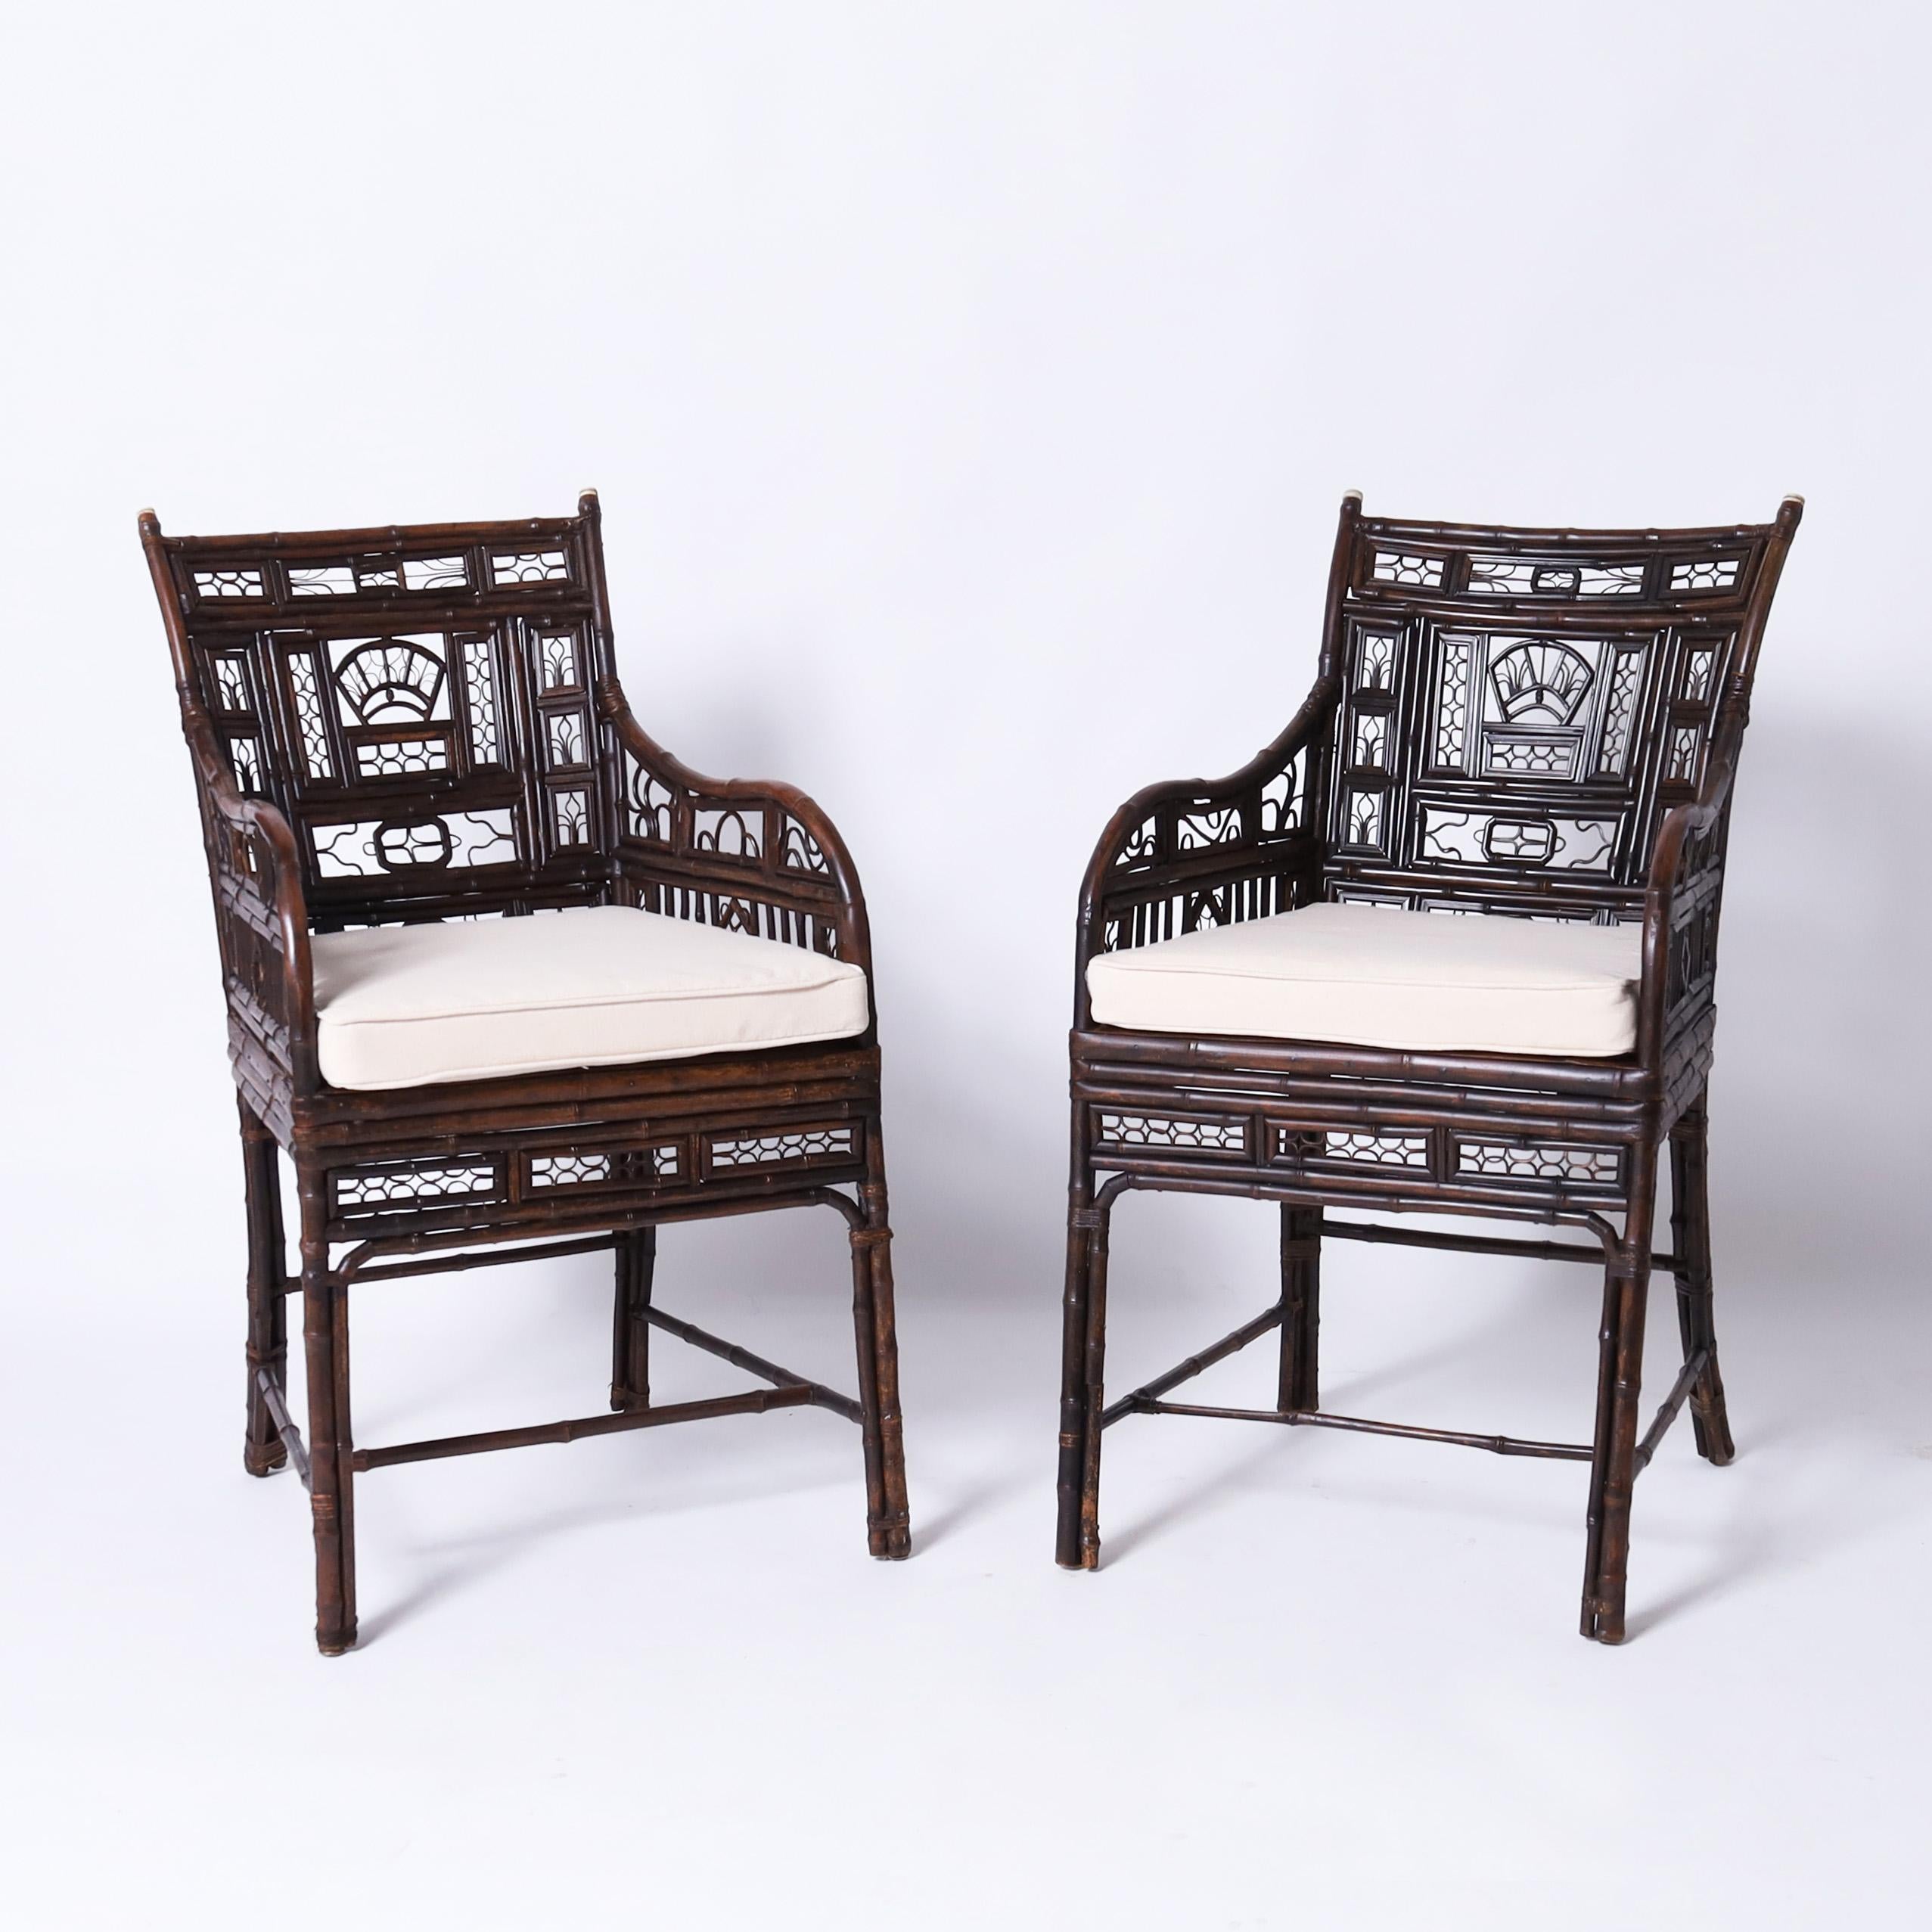 Impressive three piece set of Chinese Export furniture having a pair of armchairs and matching stand handcrafted with bamboo, bent bamboo and rattan, featuring bone finials, pegged construction, and a dark lush finish over classic elegant form.